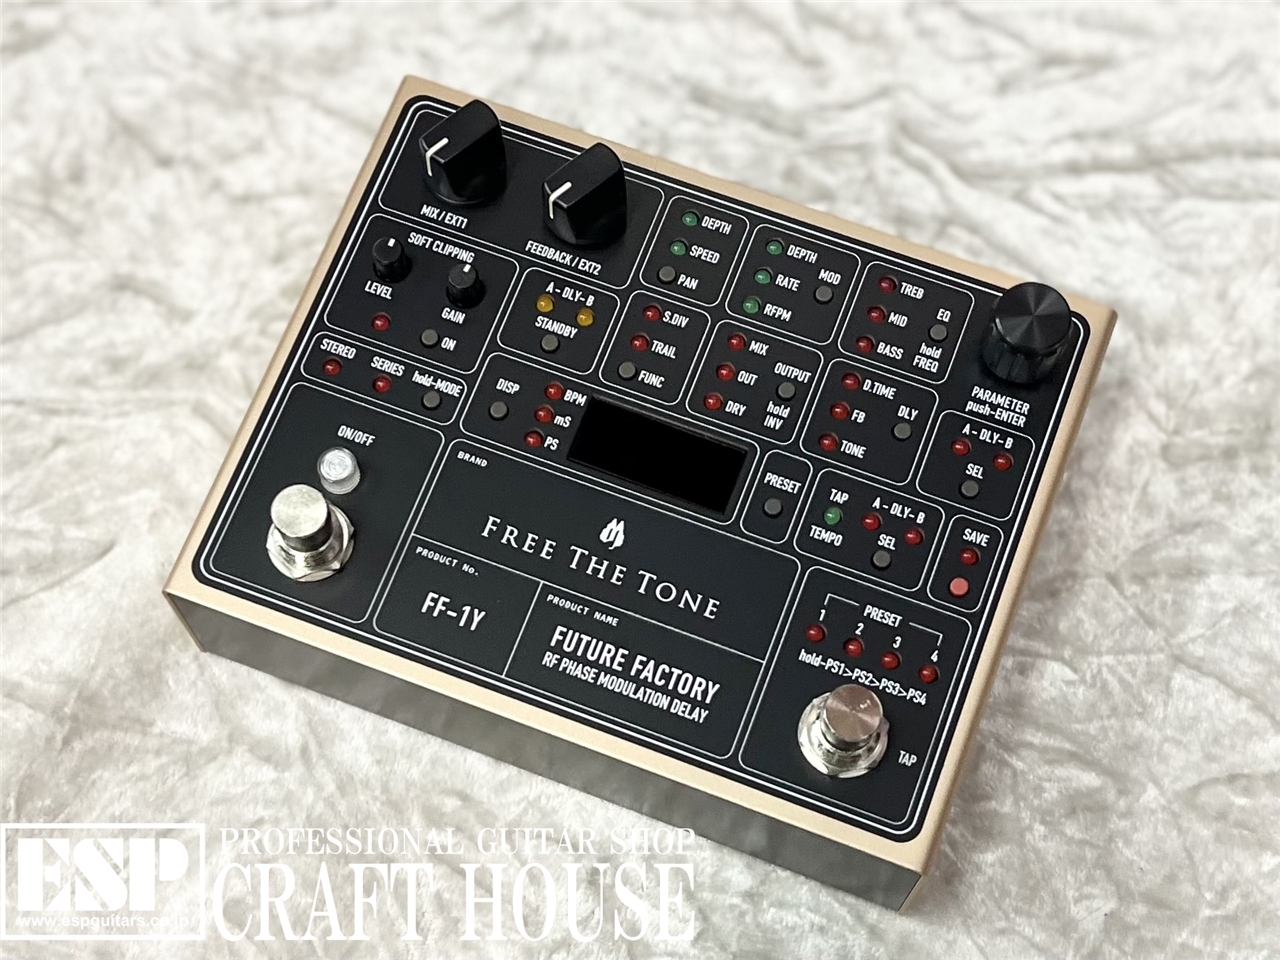 Free The Tone  FF-1Y FUTURE FACTORY 美品です